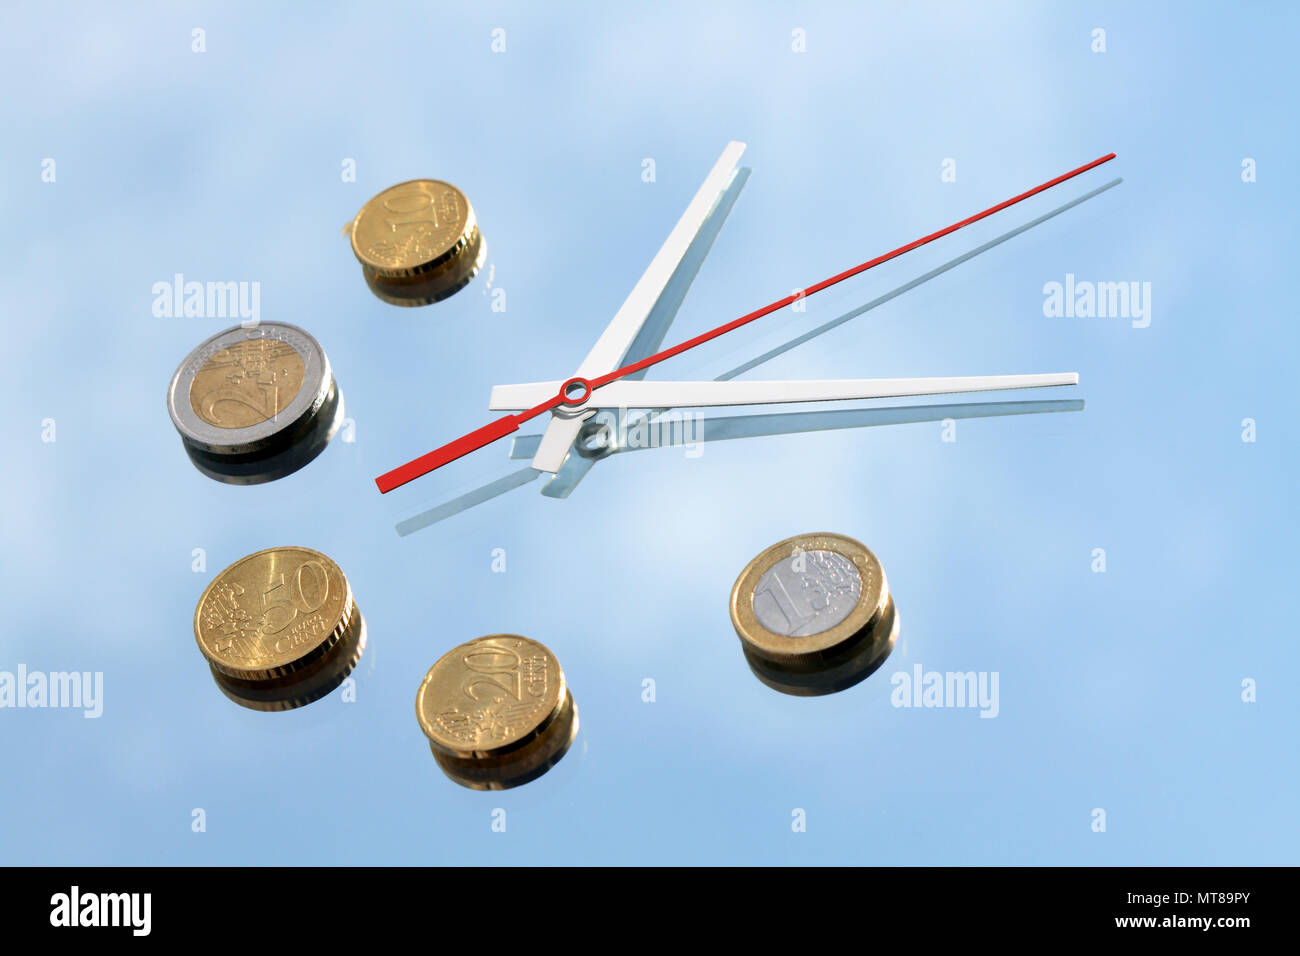 Clock hands and few euro coins lying on mirror background with blue sky and clouds reverberation Stock Photo